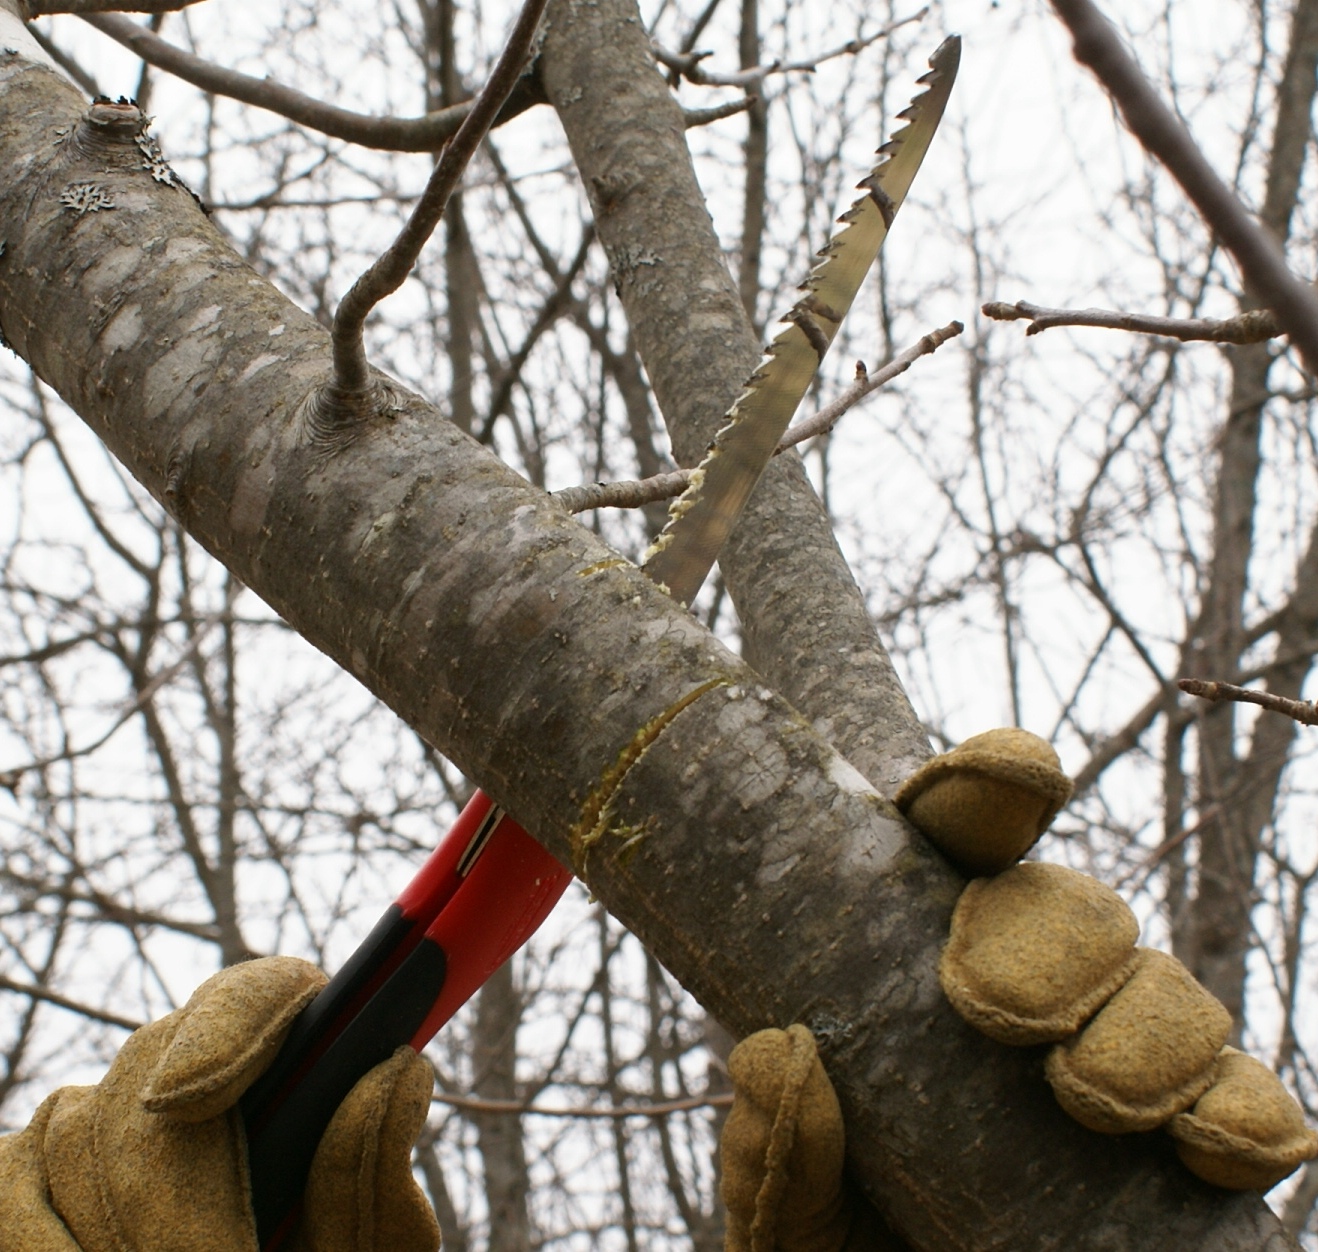 Simple Rules for Pruning Trees by Dr. Mario A. Villarino, County Extension Agent for Agriculture and Natural Resources